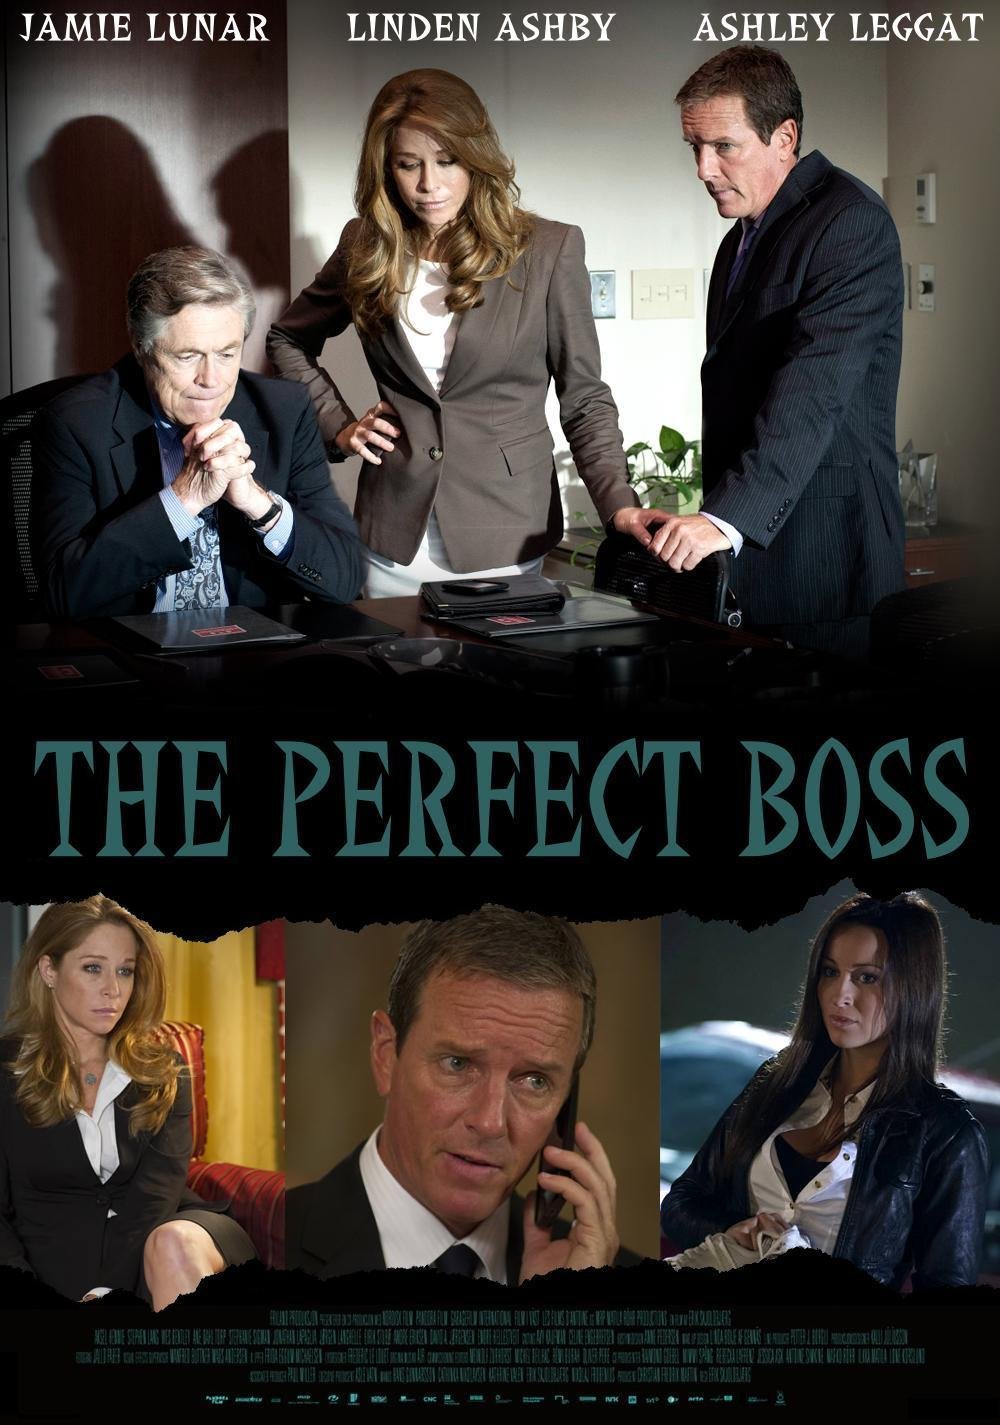 Linden Ashby, Jamie Luner and Ashley Leggat in The Perfect Boss (2013)